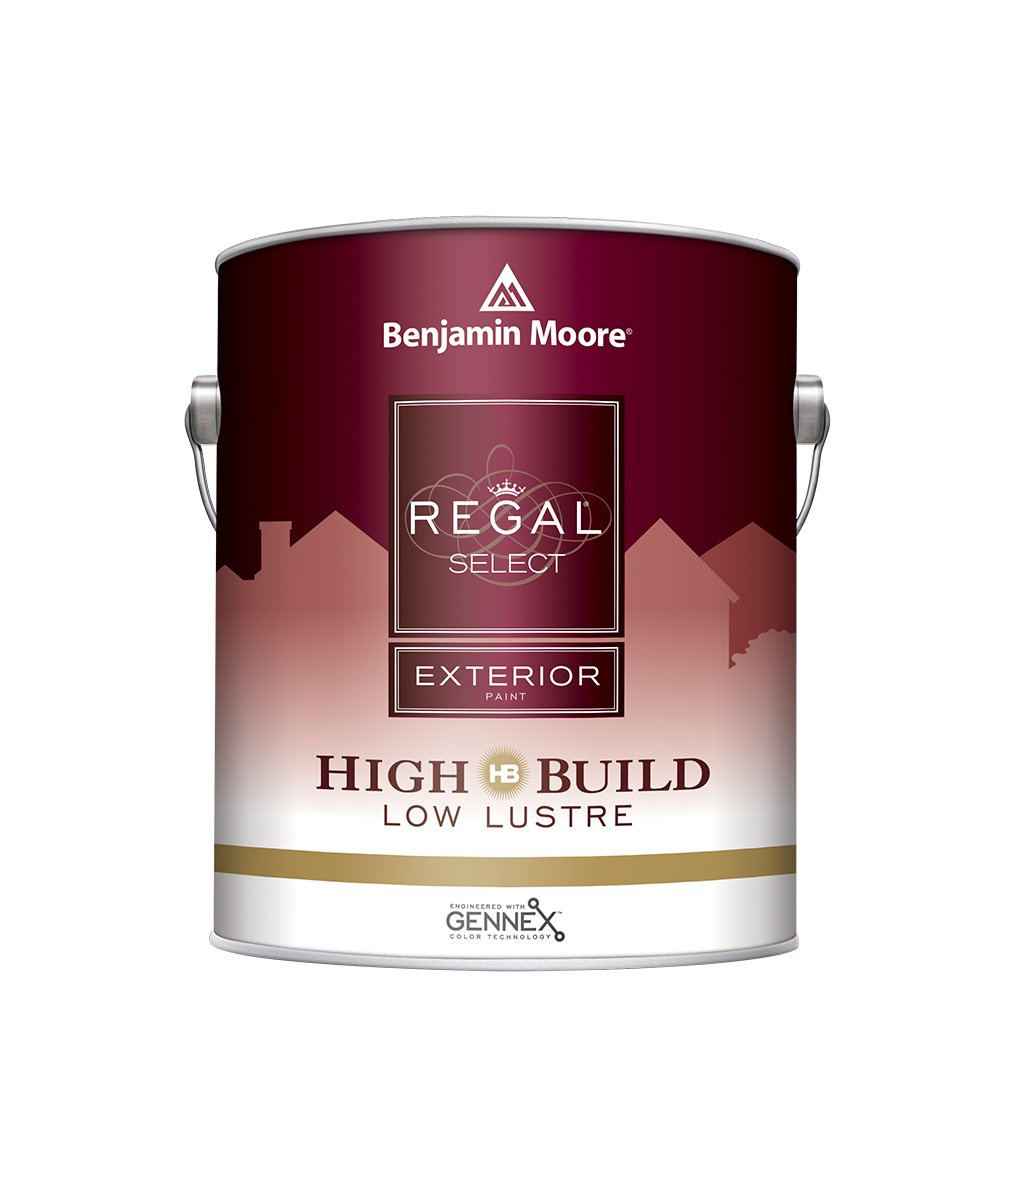 Benjamin Moore Regal Select Low Lustre Exterior Paint Gallon, available at JC Licht.